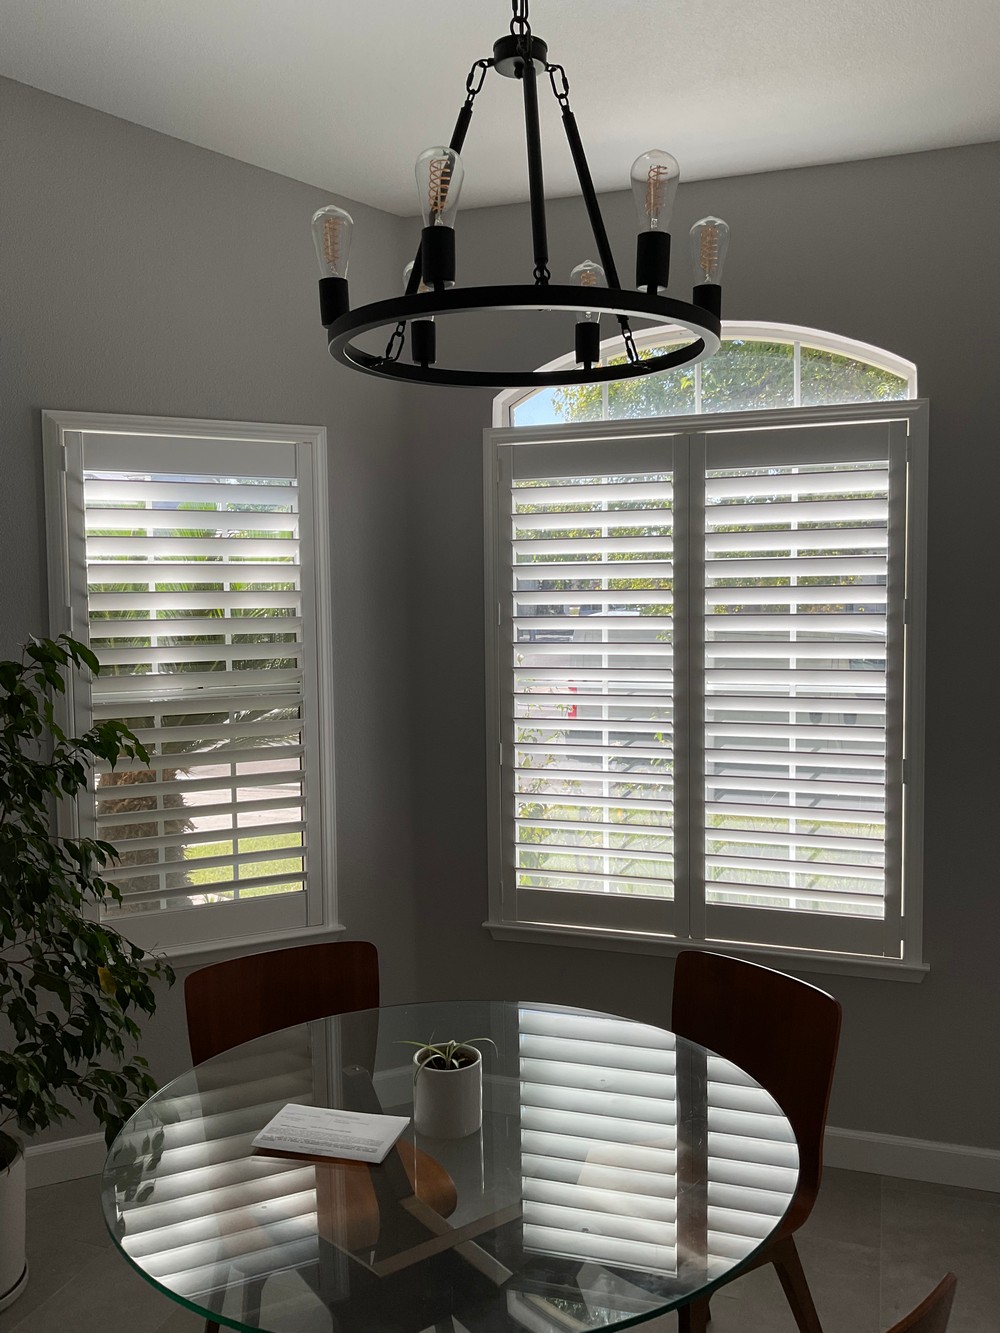 Vinyl Shutters Completing This Home in Harlan Ranch Clovis, CA